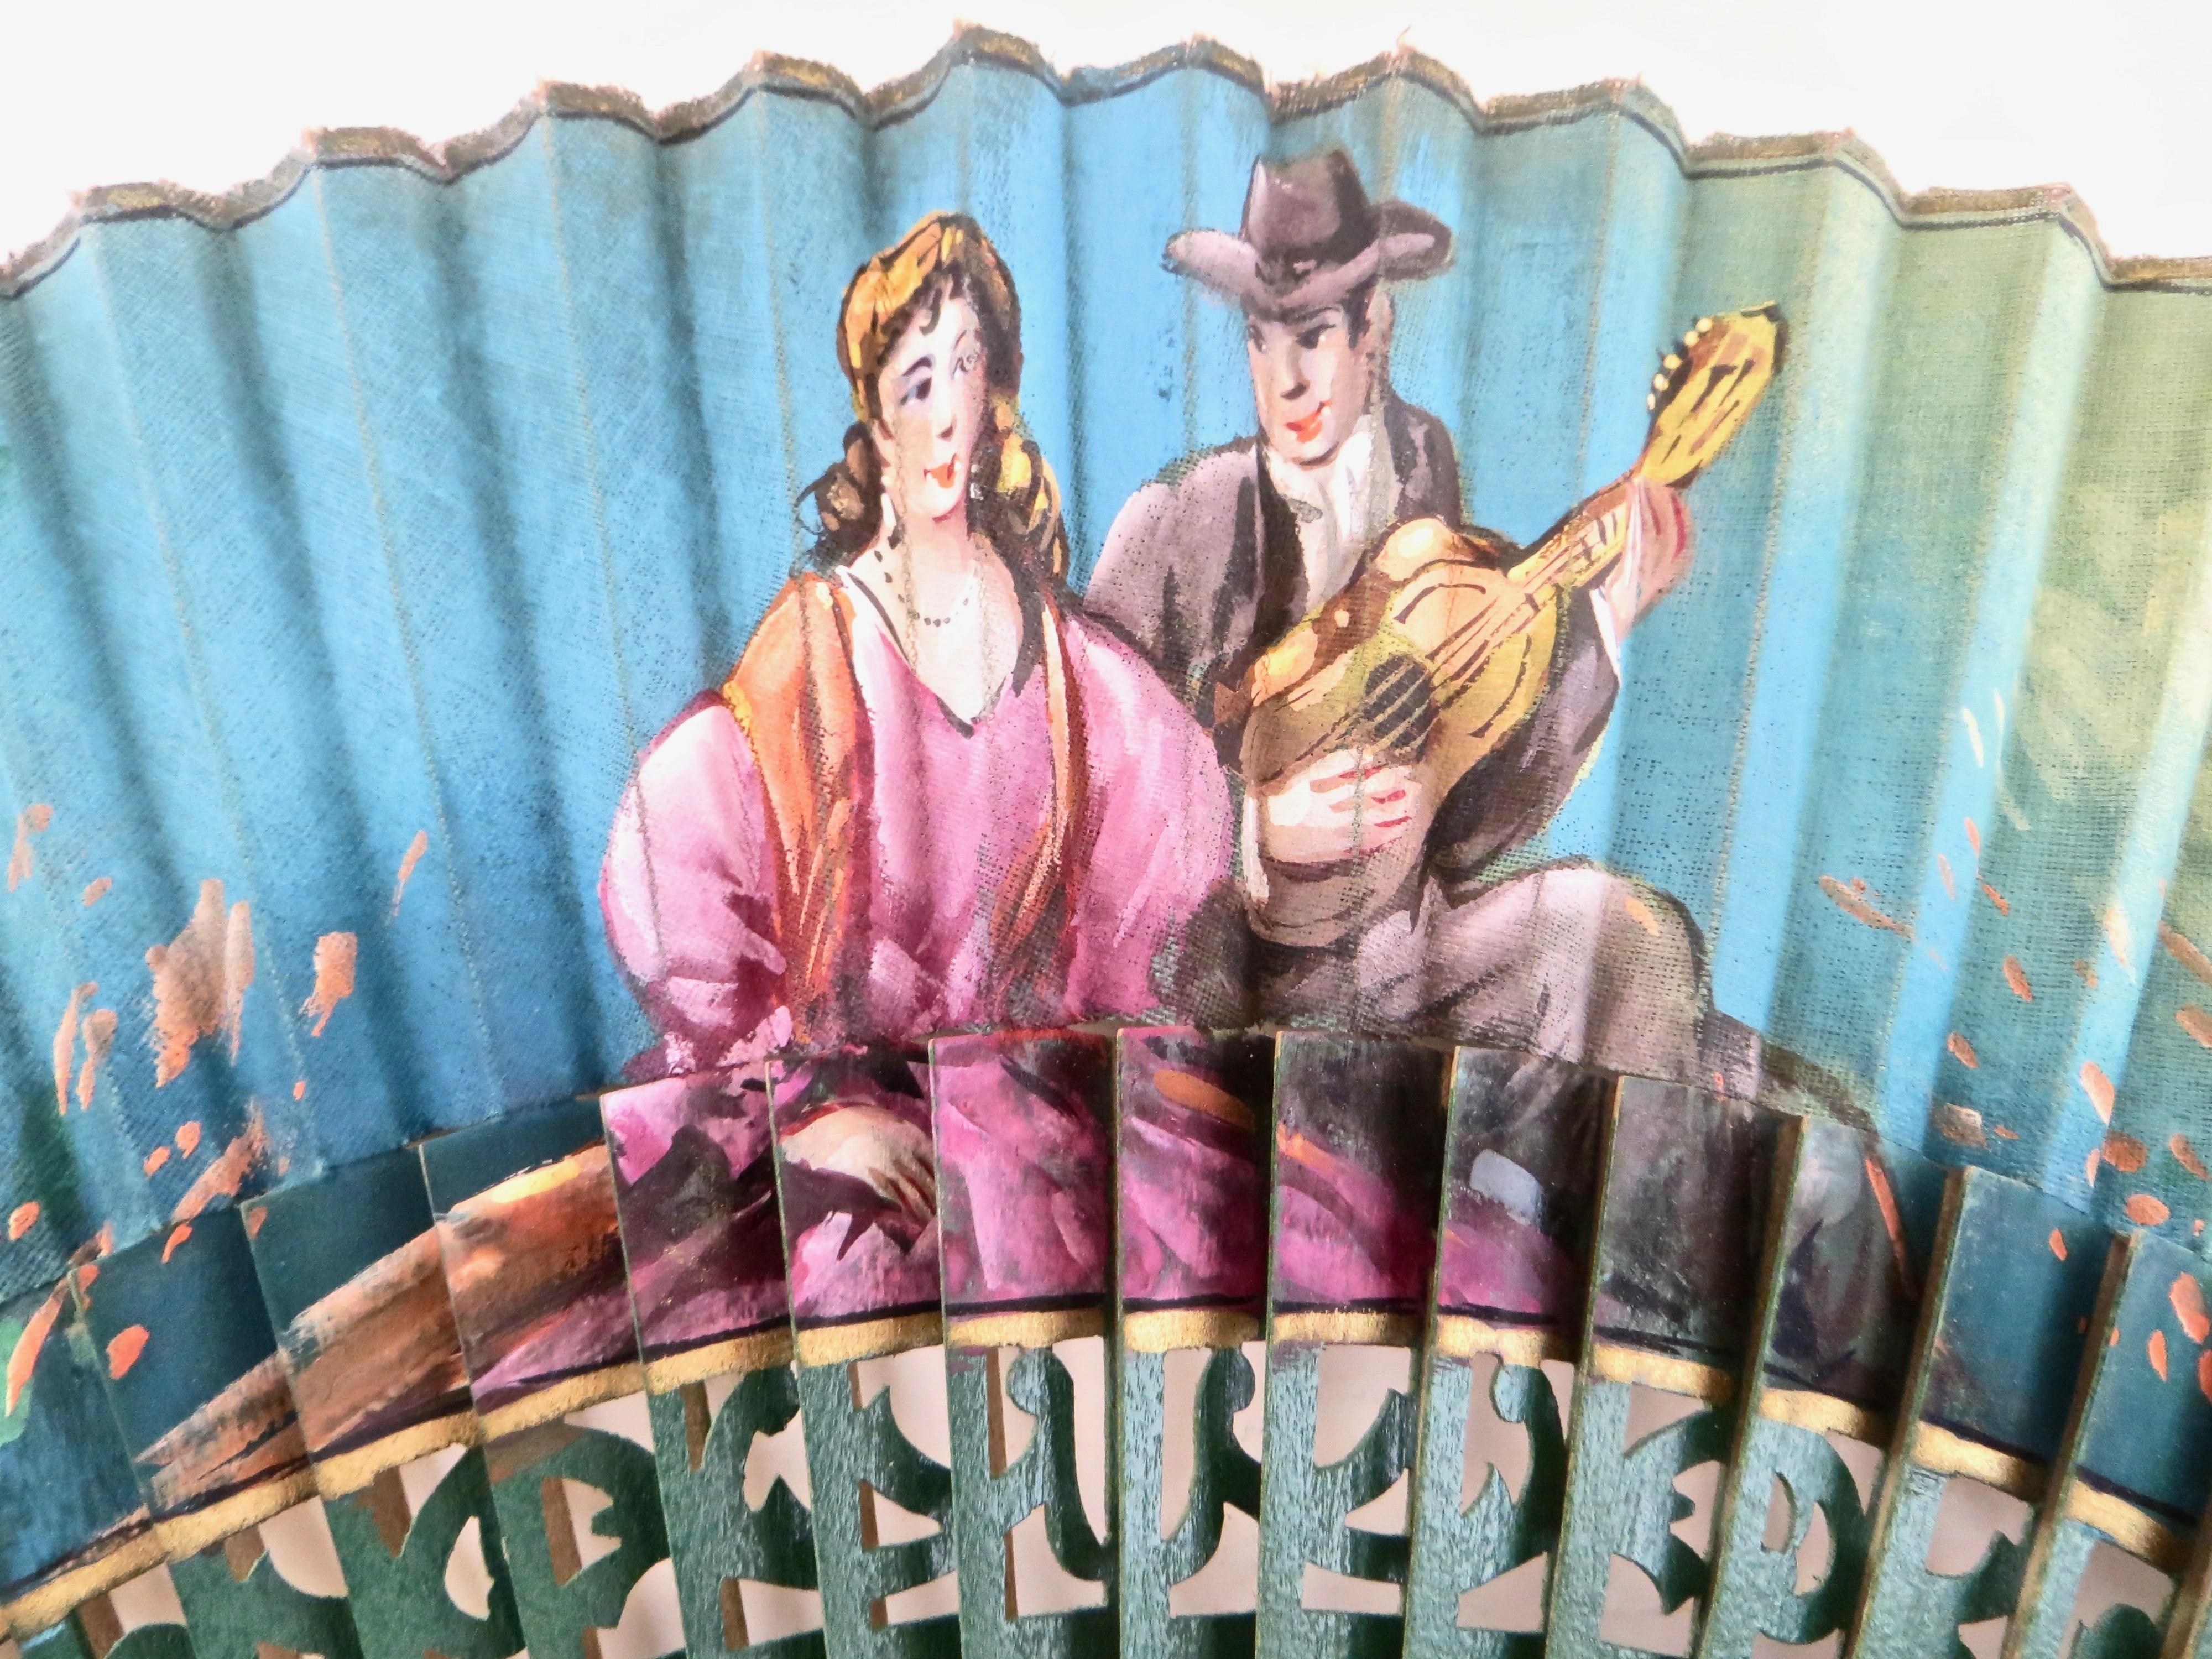 Post War hand held fan, hand painted scenes on green fabric and painted wood. Subject matter on one side consists of a young couple with a gentleman playing guitar serenading the colorfully dressed woman. Floral decorations flank each side, while